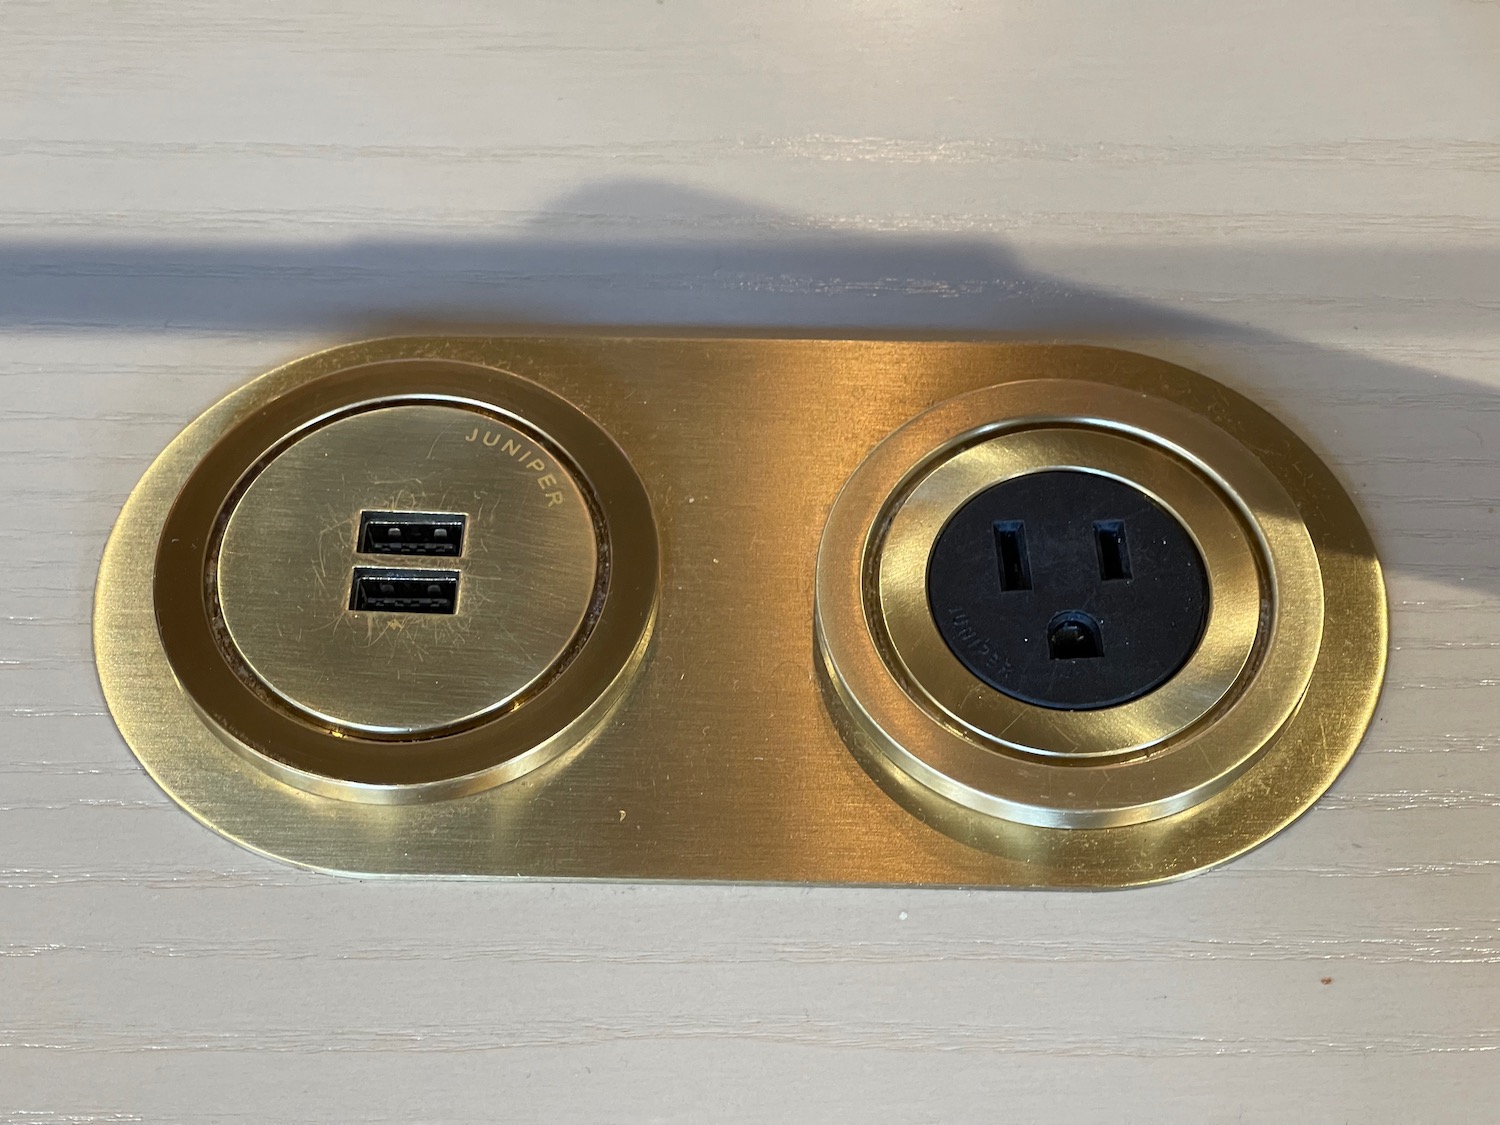 a gold plate with two plugs